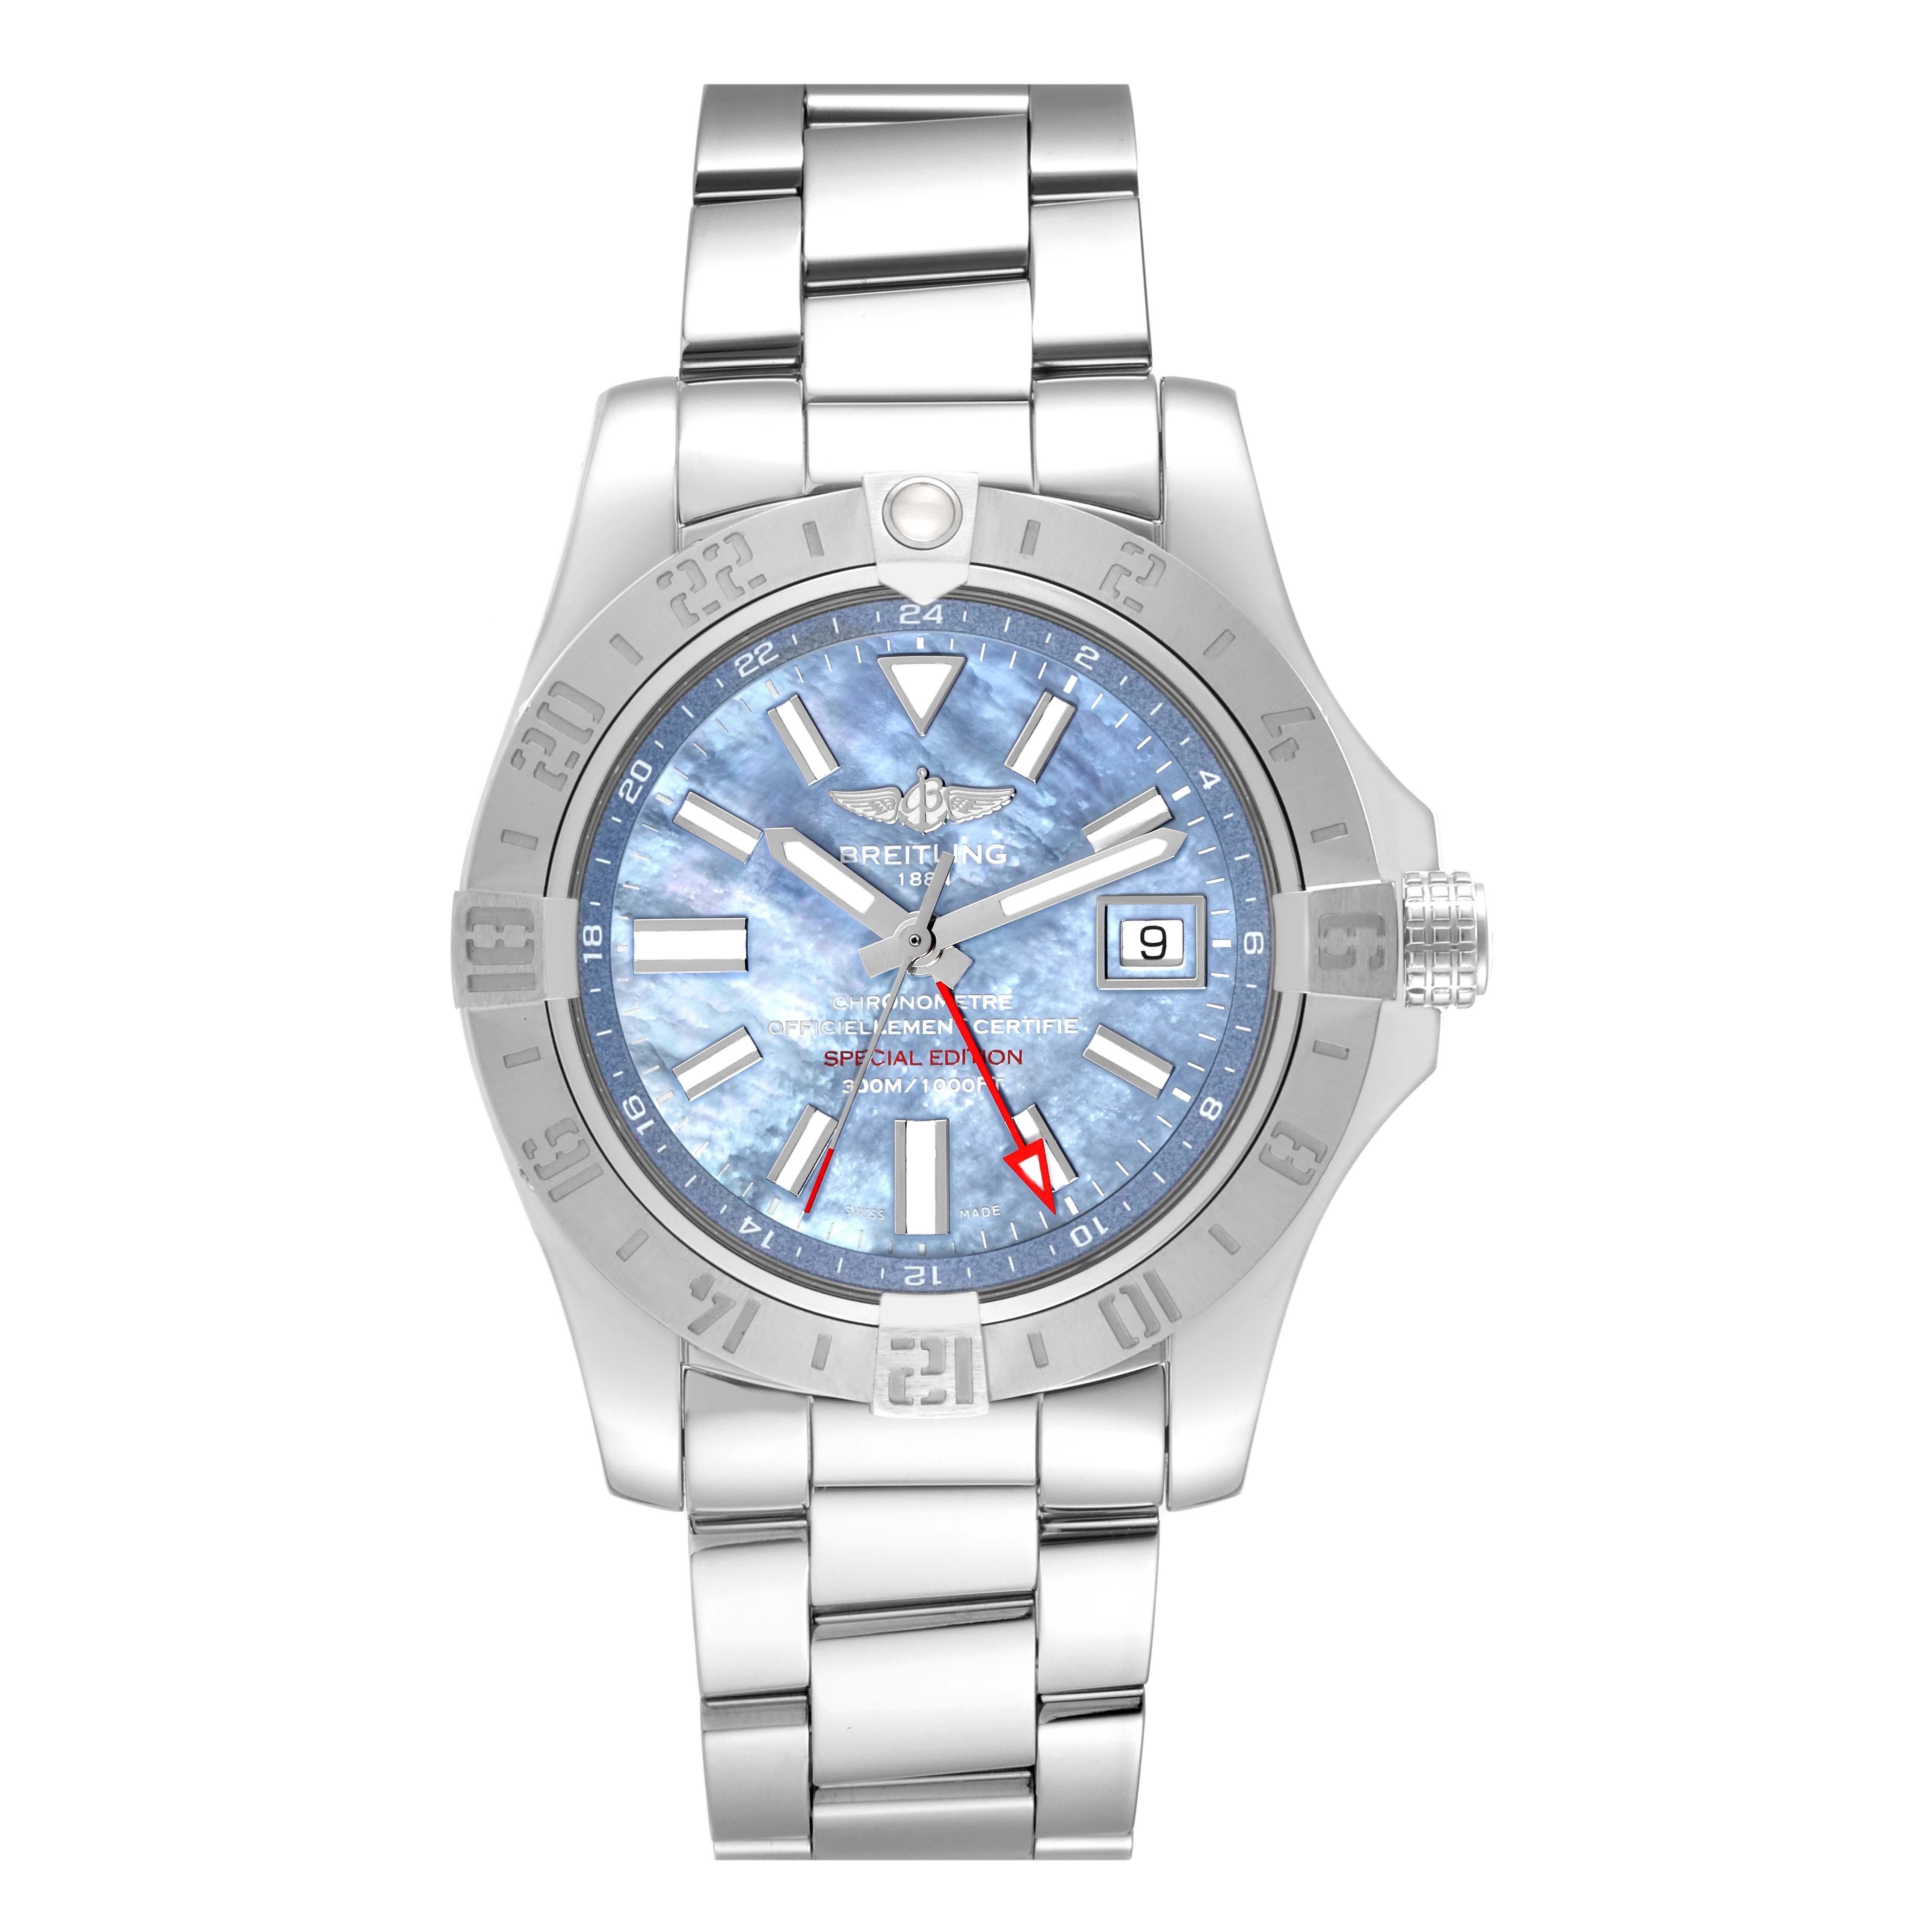 Breitling Avenger II GMT Blue Mother of Pearl Dial Steel Mens Watch A32390 Box Card. Automatic self-winding movement with GMT function. Stainless steel case 43 mm in diameter with screw-down crown. Stainless steel bidirectional rotating bezel with